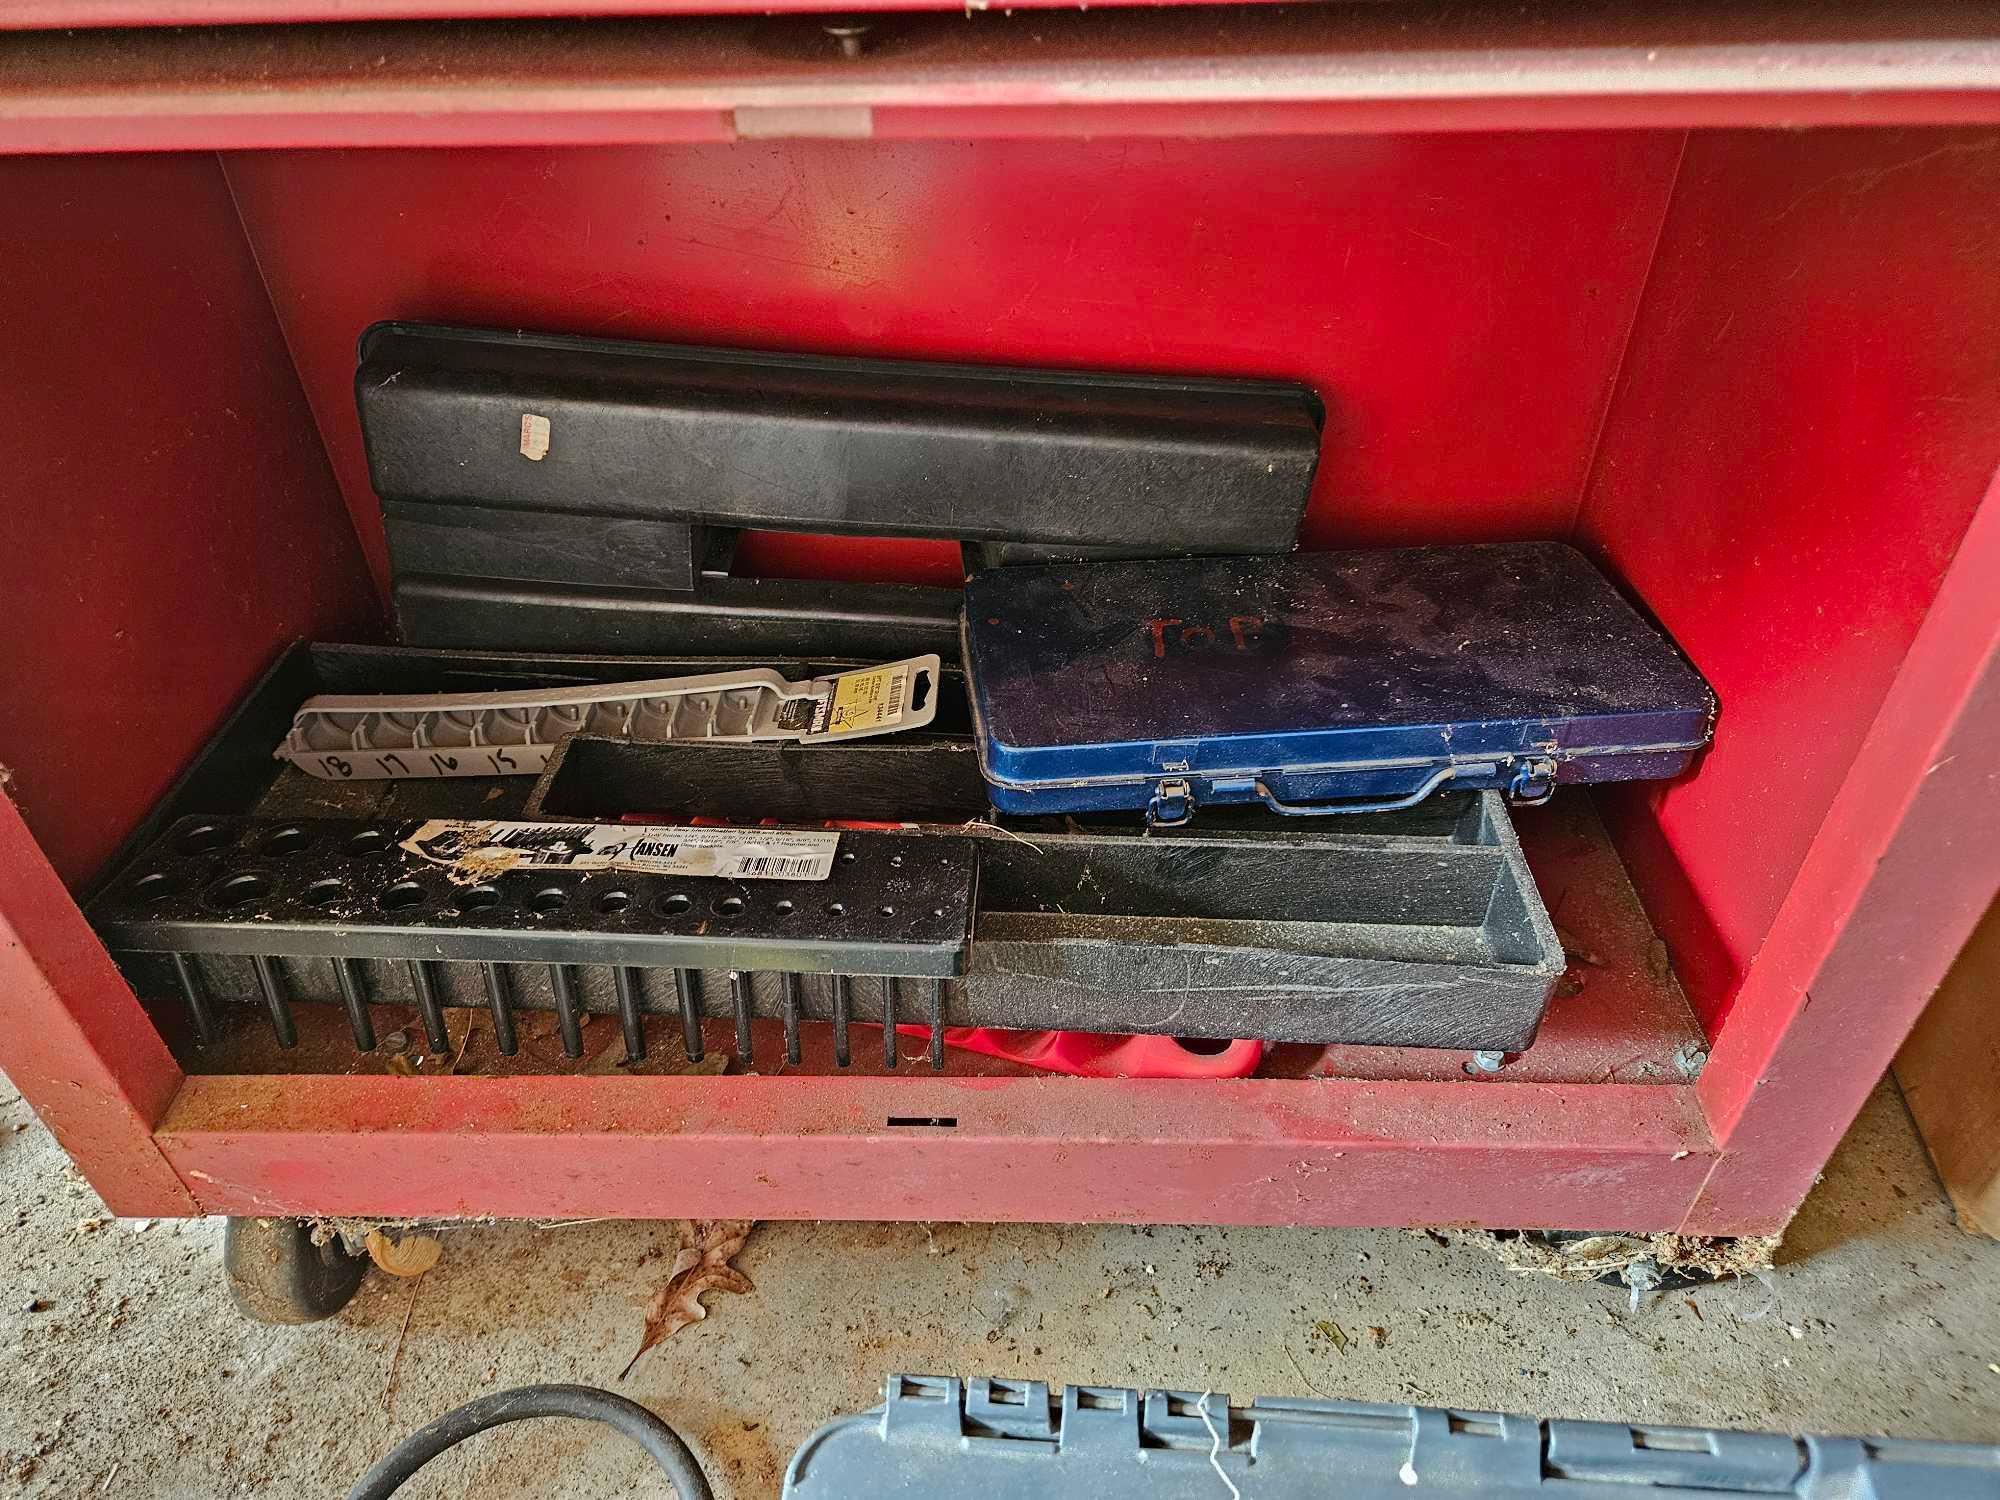 Conglomerate Upright Toolbox & Contents